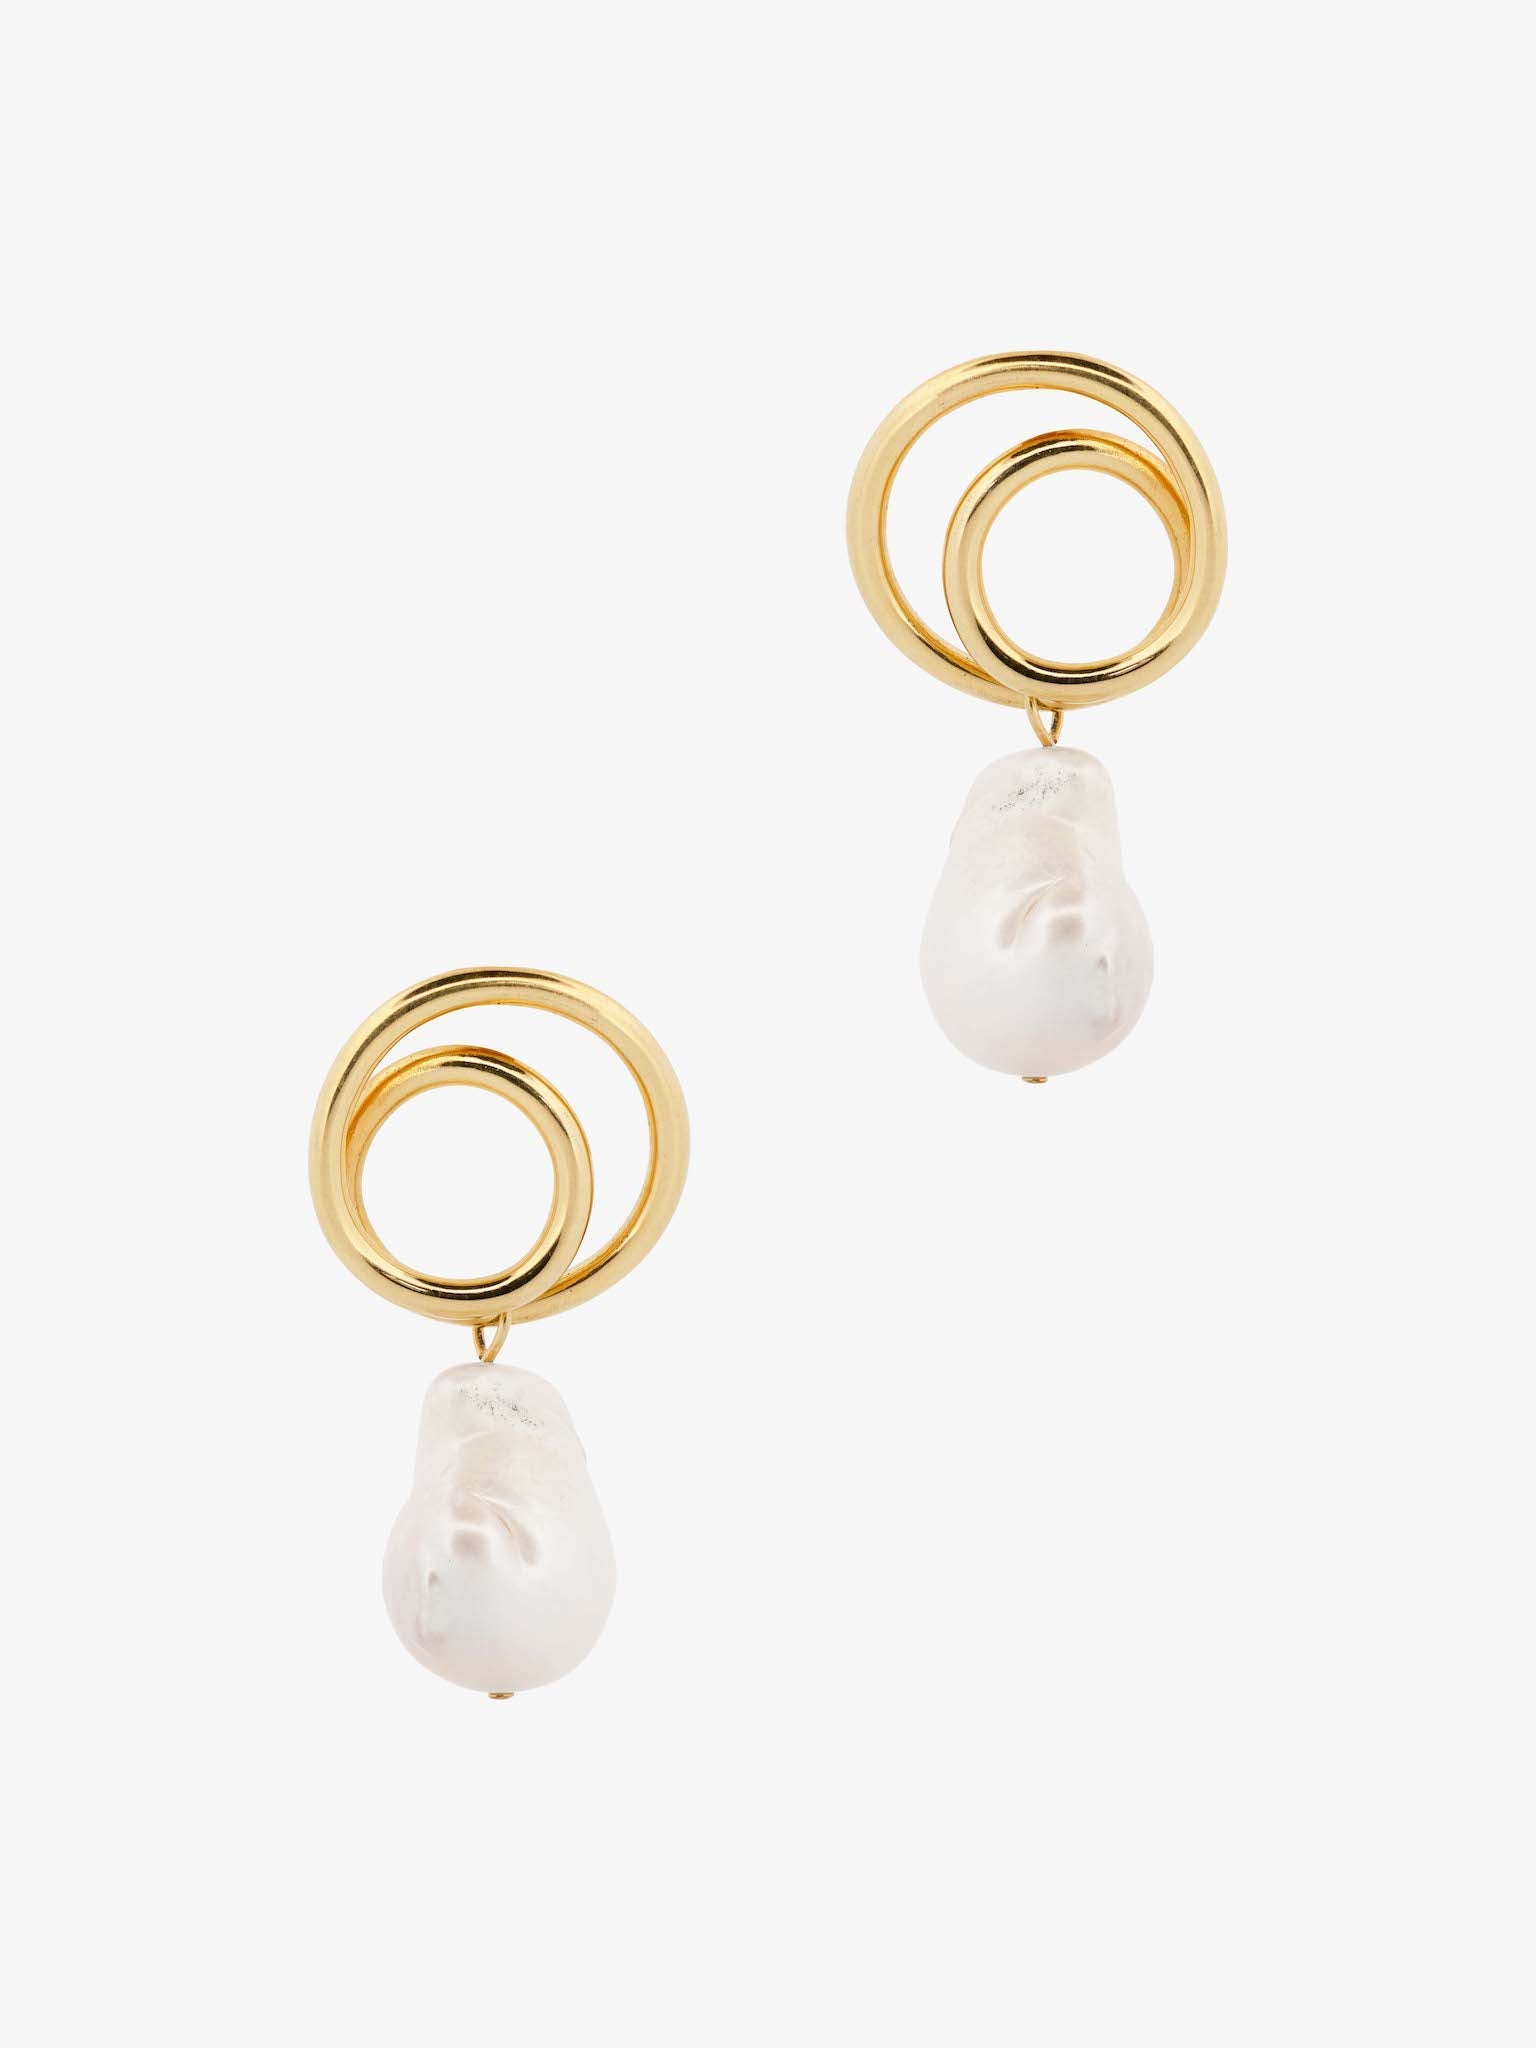 Coiling gold vermeil and baroque pearl earrings